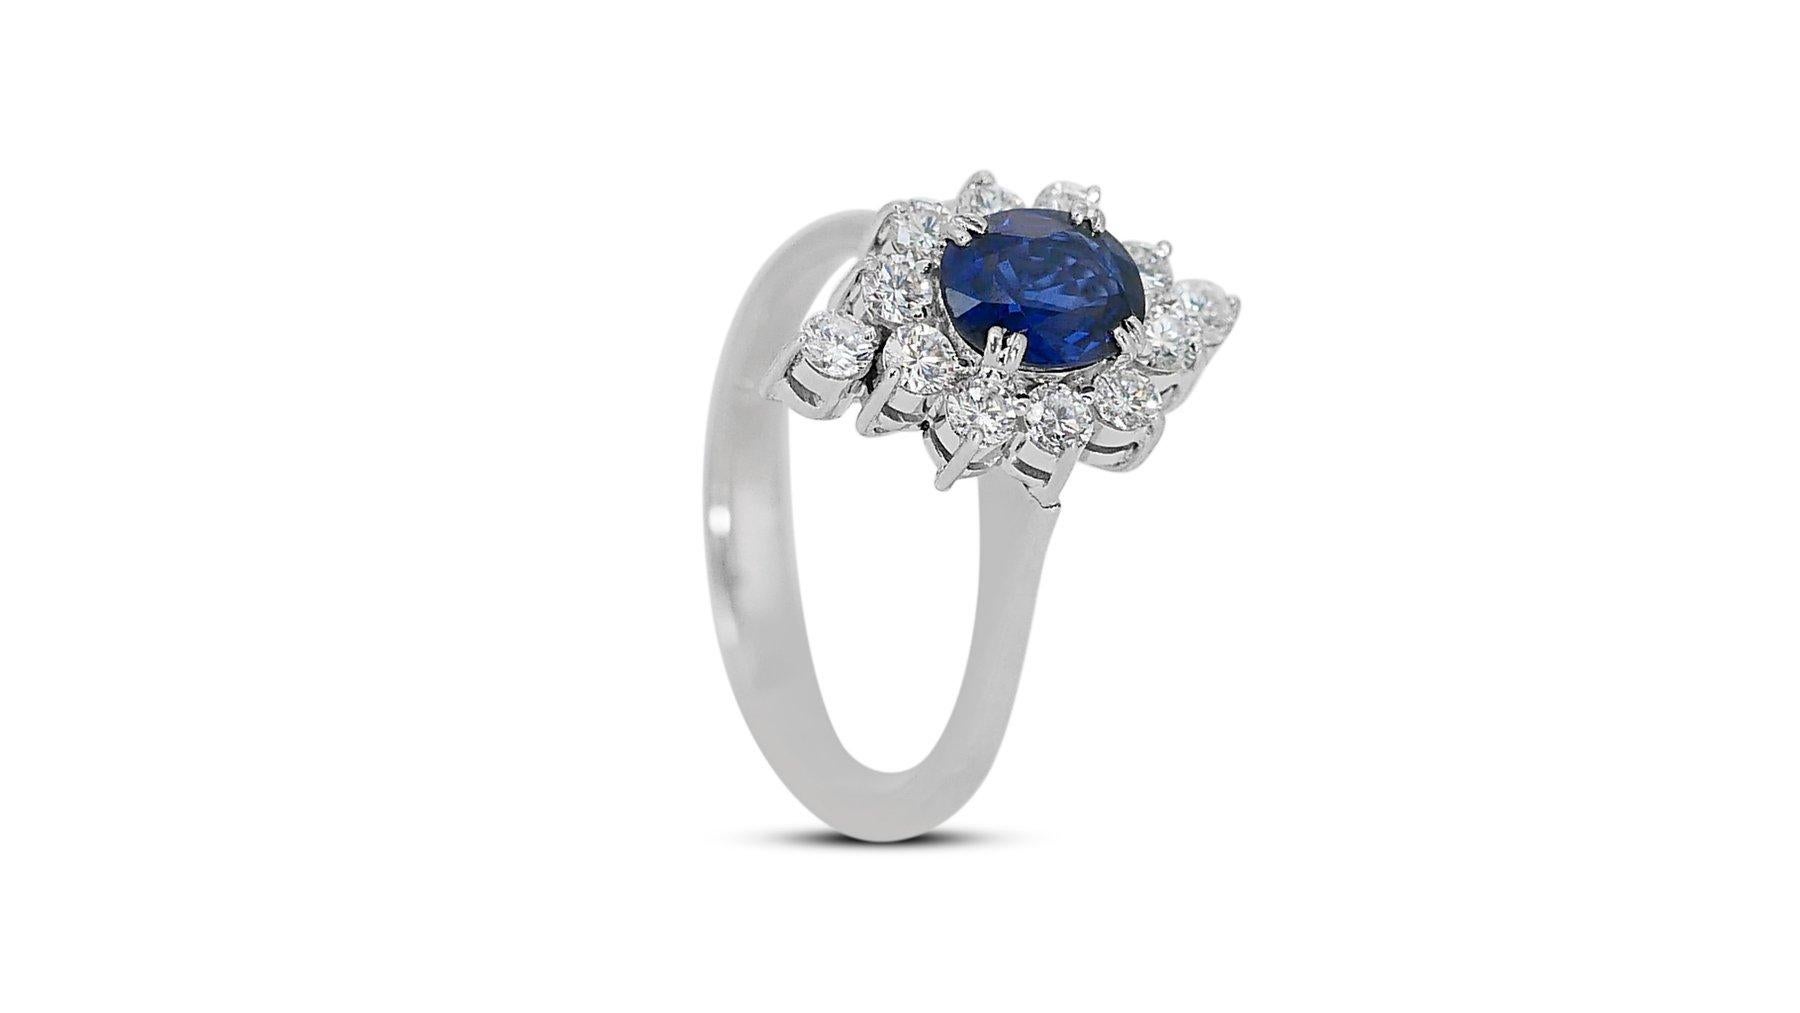 Lovely 1.37 carat oval natural sapphire ring in 18K white gold 3